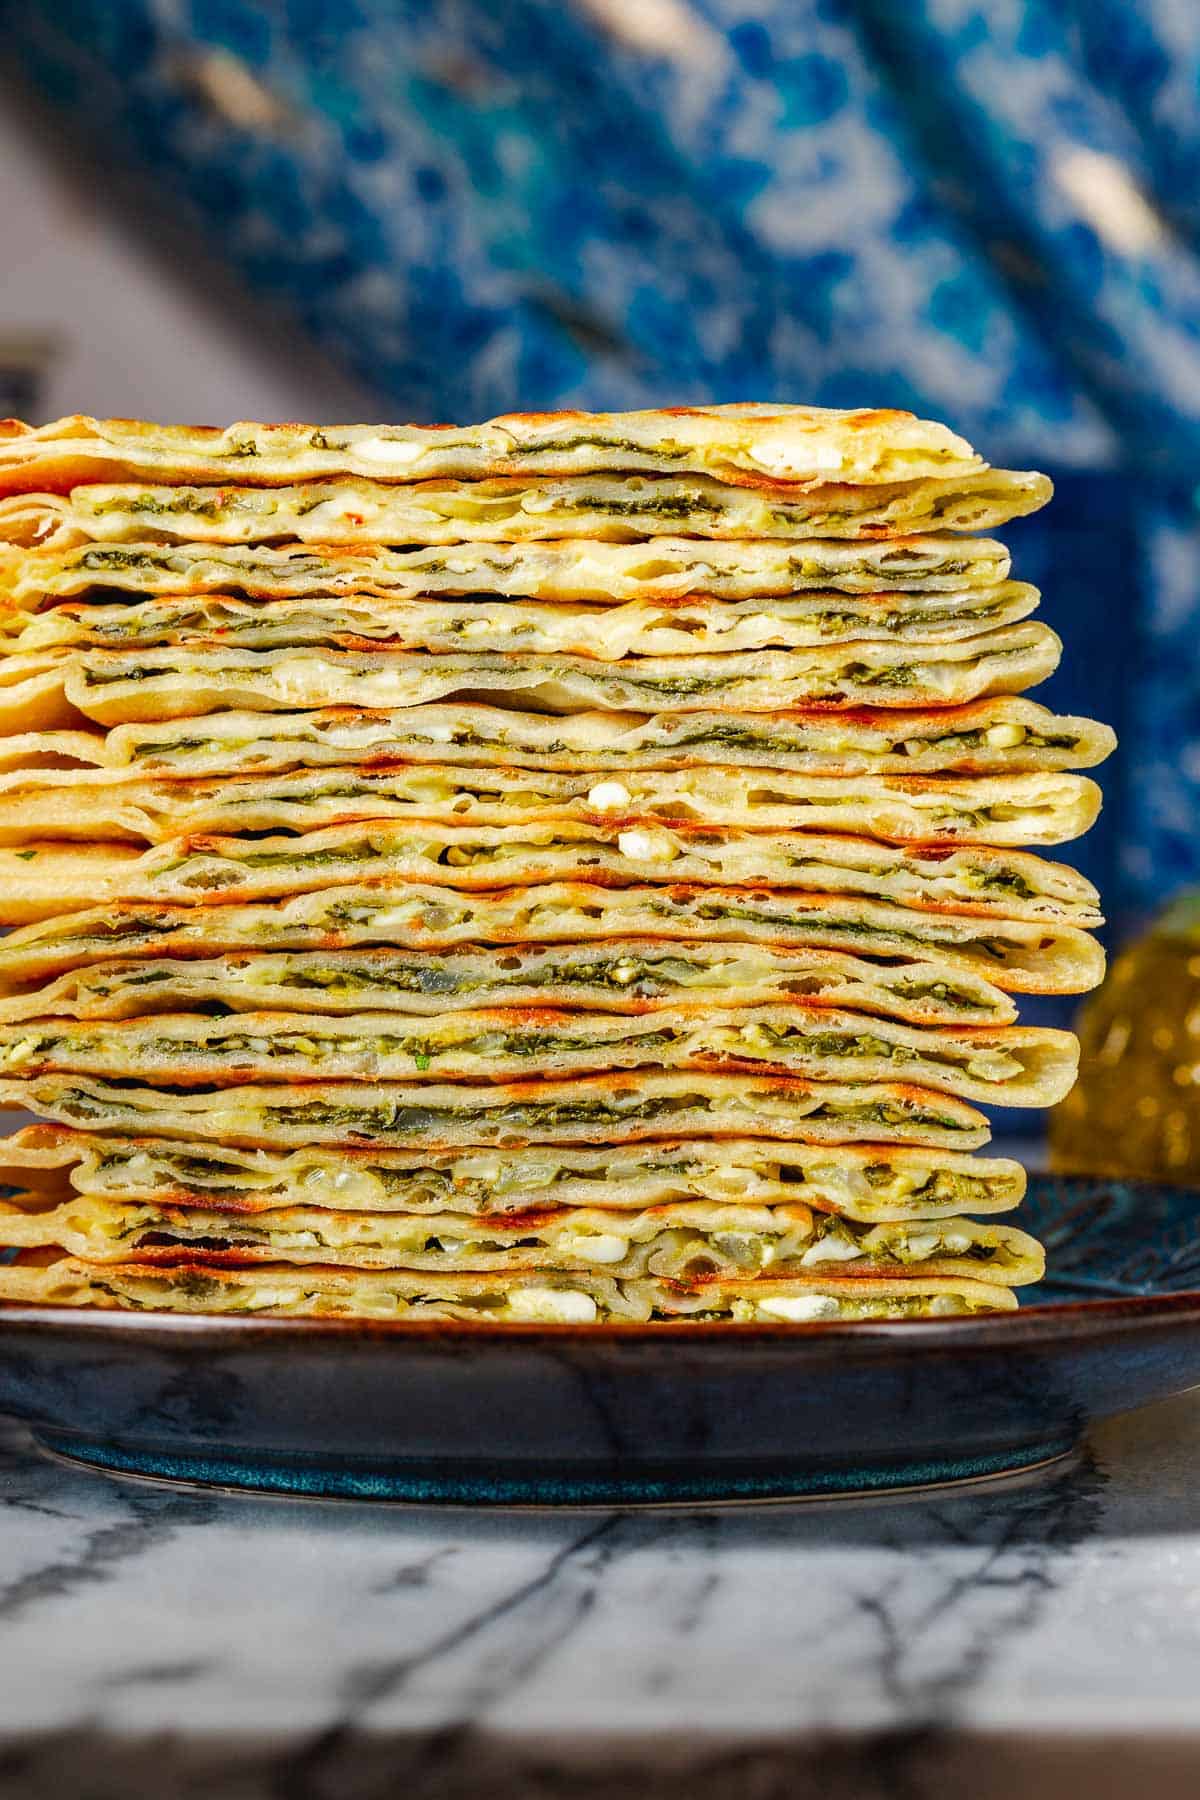 several gozleme turkish flatbread triangles stacked on a blue plate.